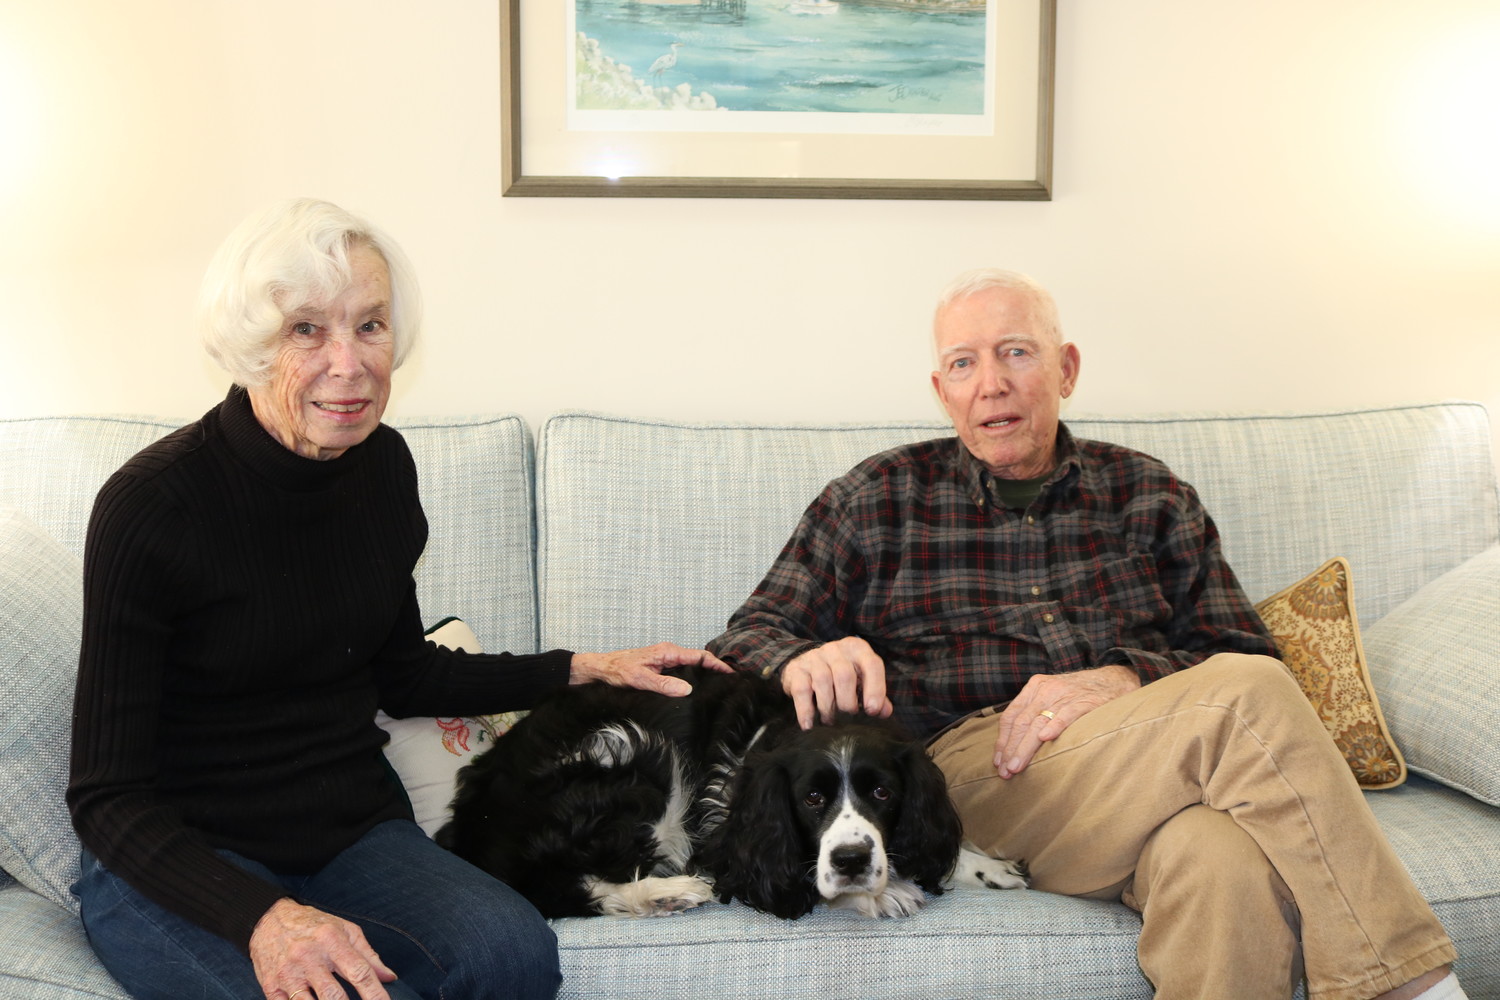 Jennie and John Veal and their dog Lucy live in Vicar’s Landing retirement community today.